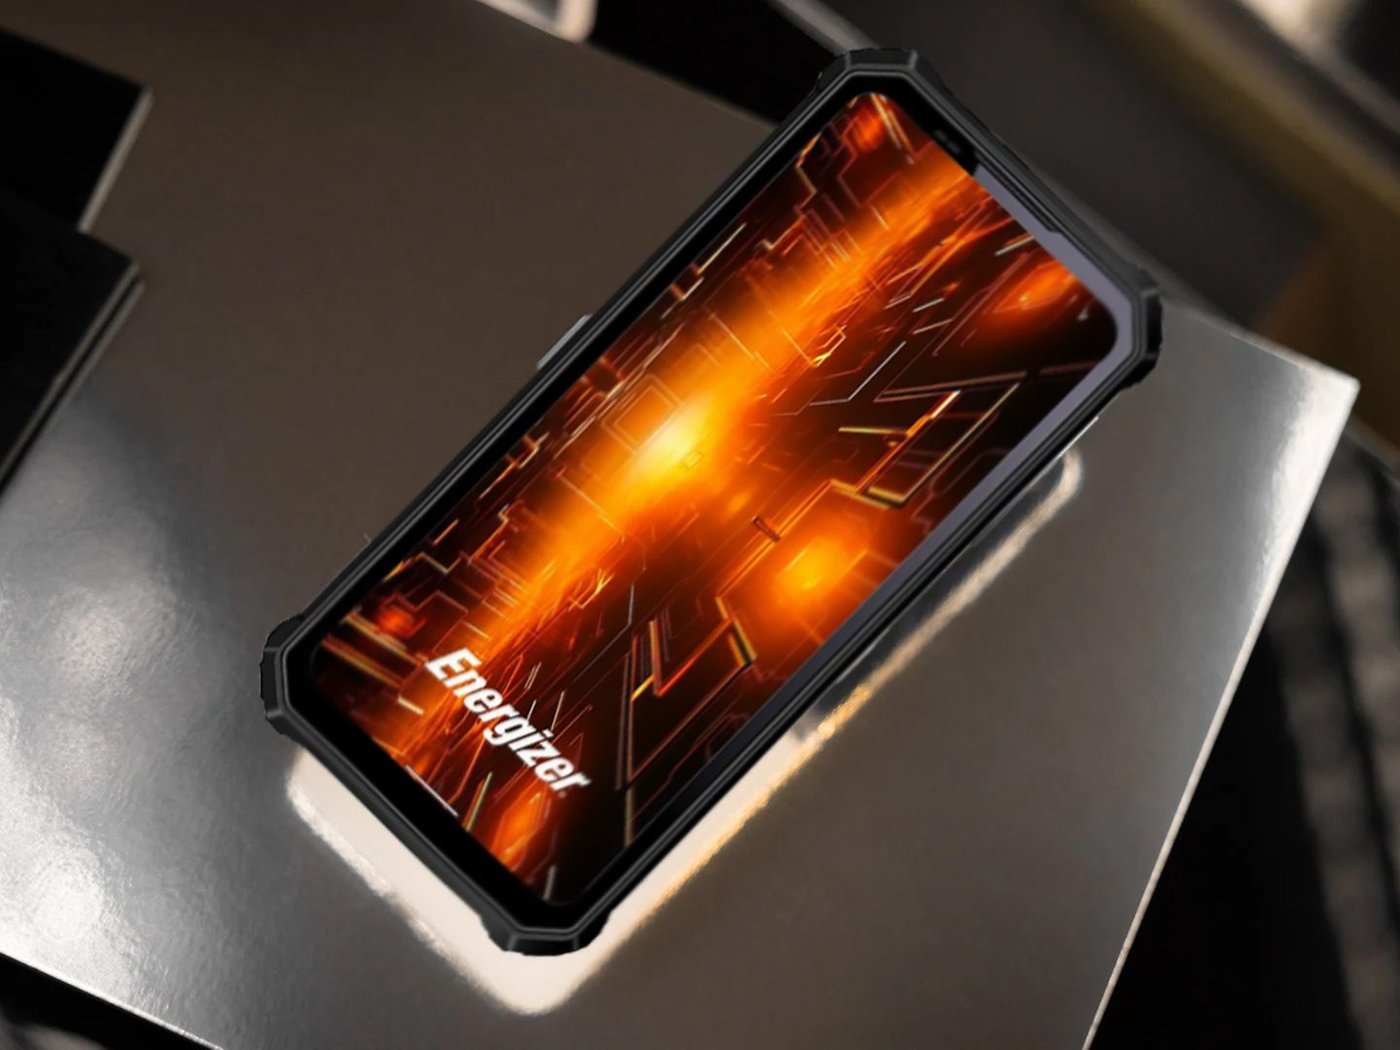 Energizer Hard Case P28K is a Power Bank Phone with 28,000 mAh Battery